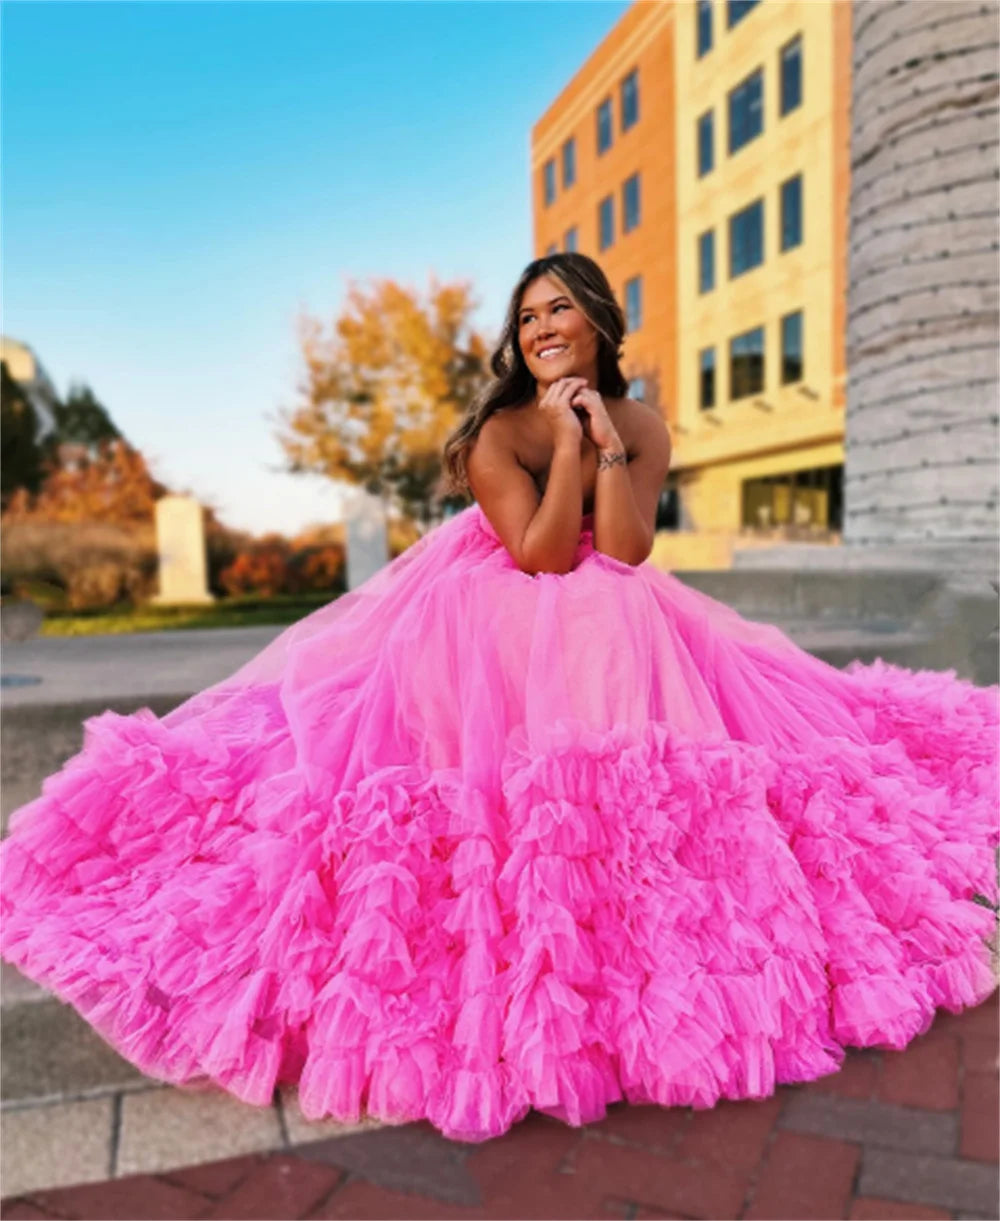 Strapless Hot Pink Evening Dress Princess Puffy A-line Party Dress Tulle Sweep Tail Multi layer Dress The Clothing Company Sydney